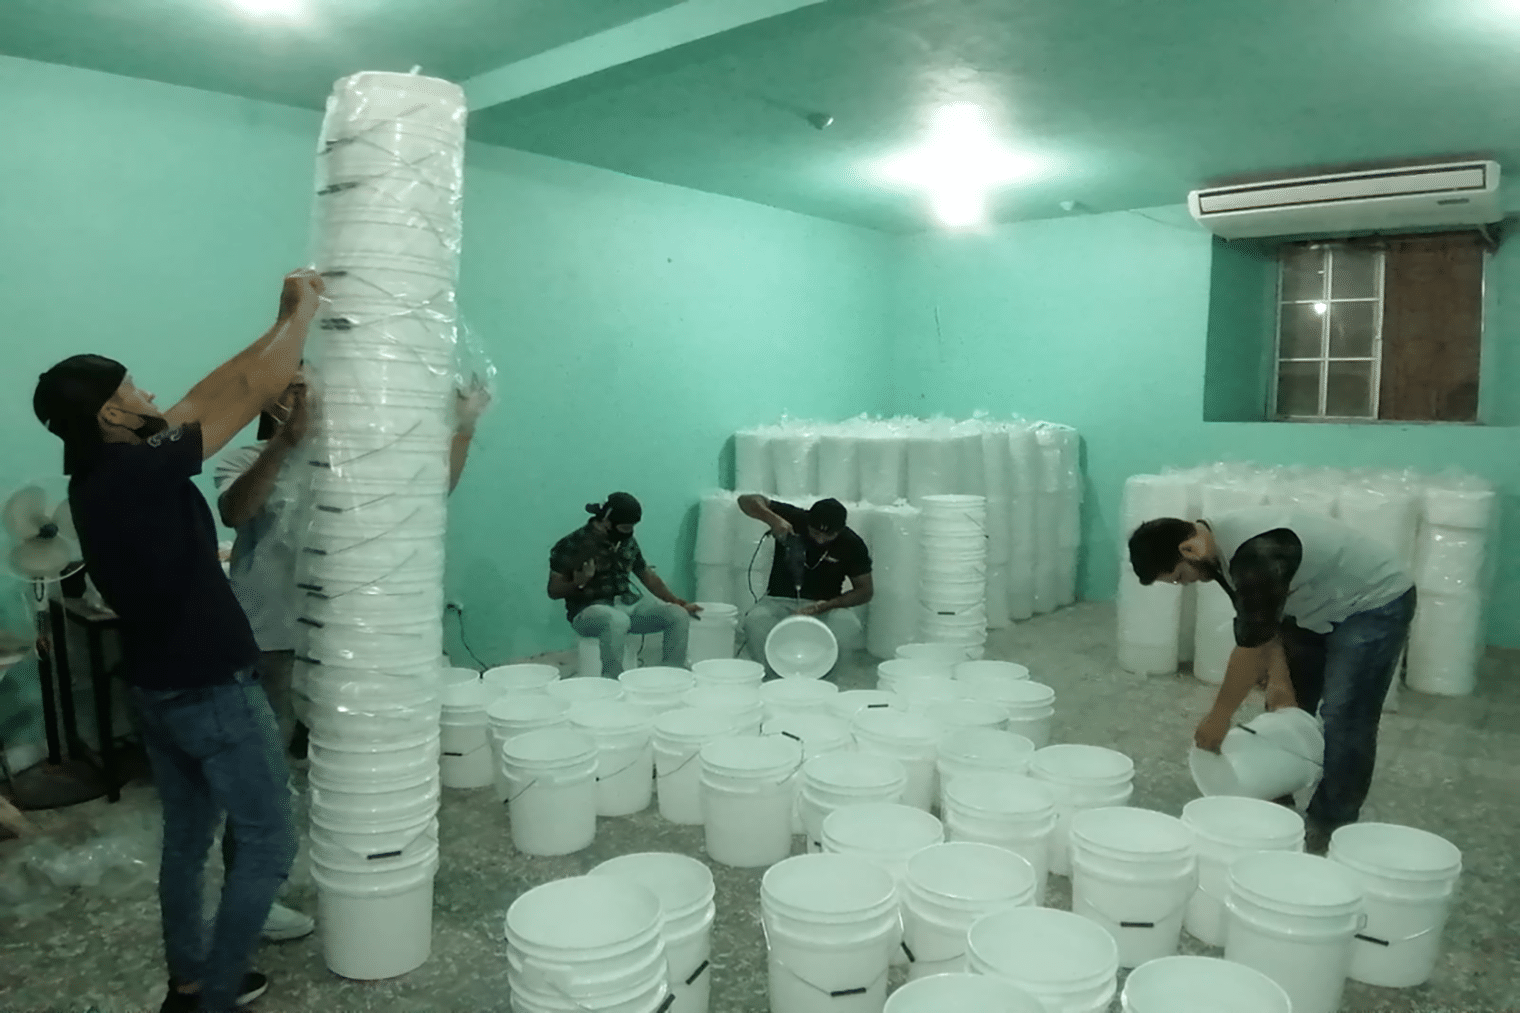 workers preparing water filtration out of buckets